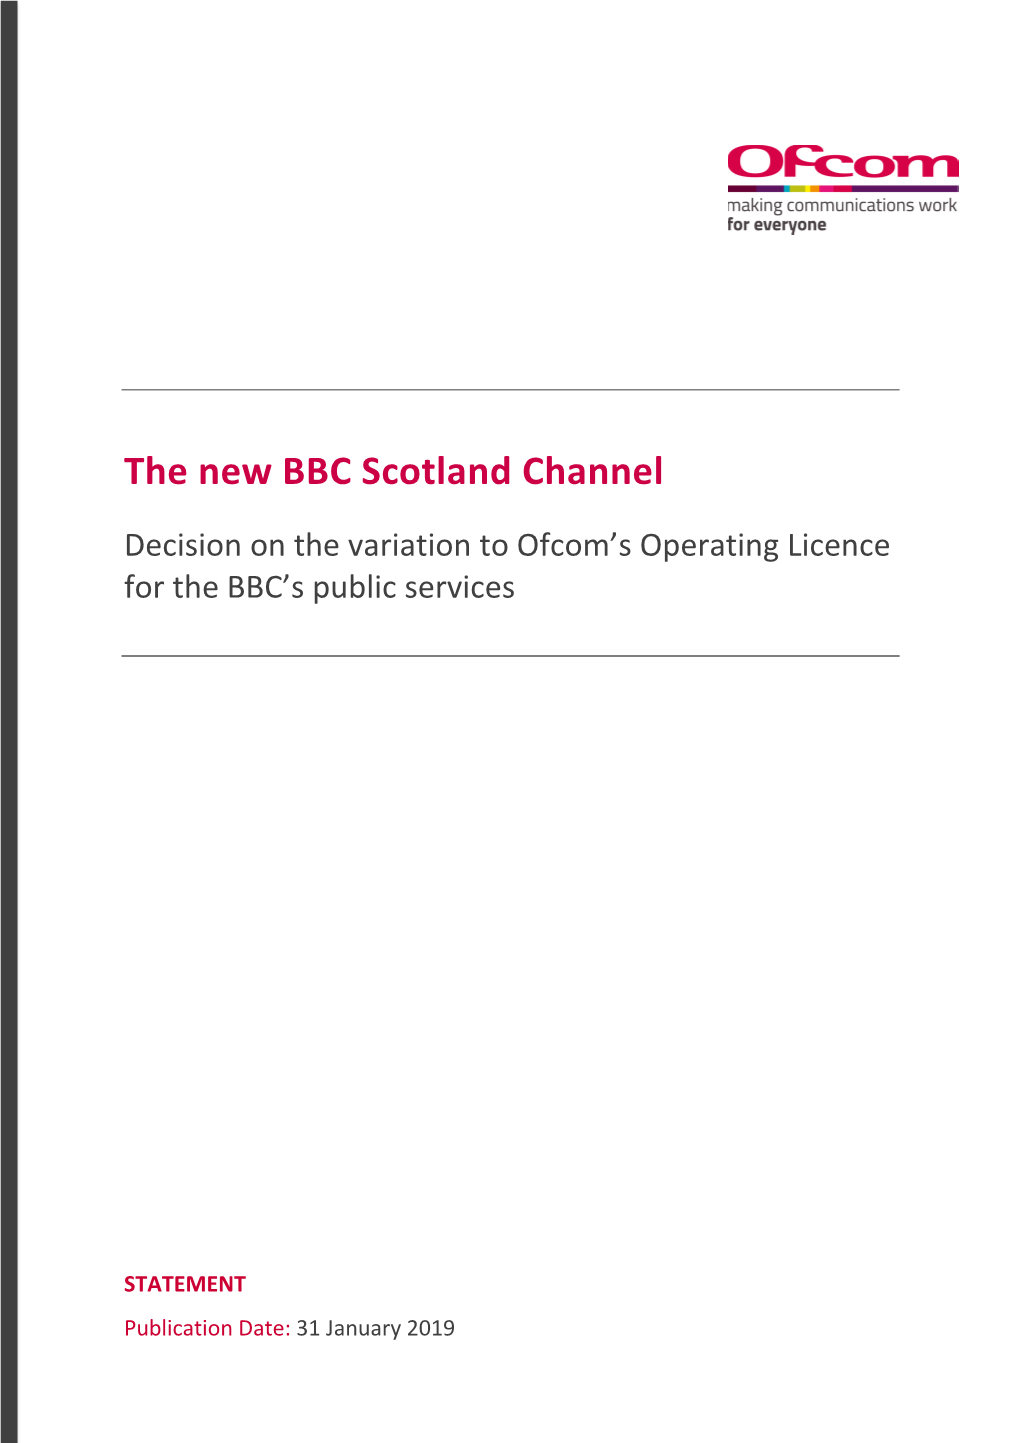 The New BBC Scotland Channel Decision on the Variation to Ofcom’S Operating Licence for the BBC’S Public Services